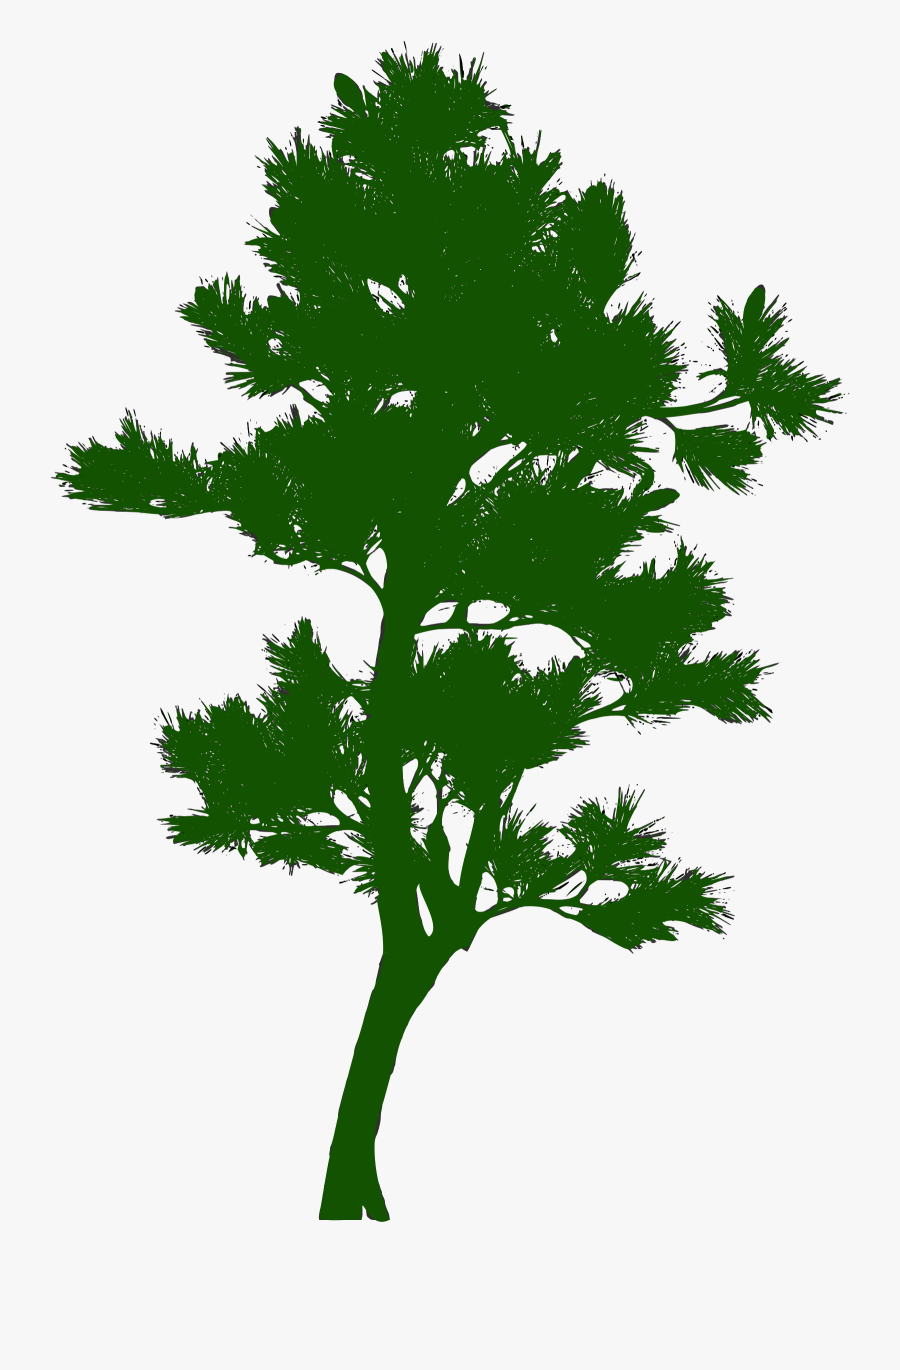 Silhouette Arbre 06 Clip Arts - Green Tree Silhouette Png, Transparent Clipart